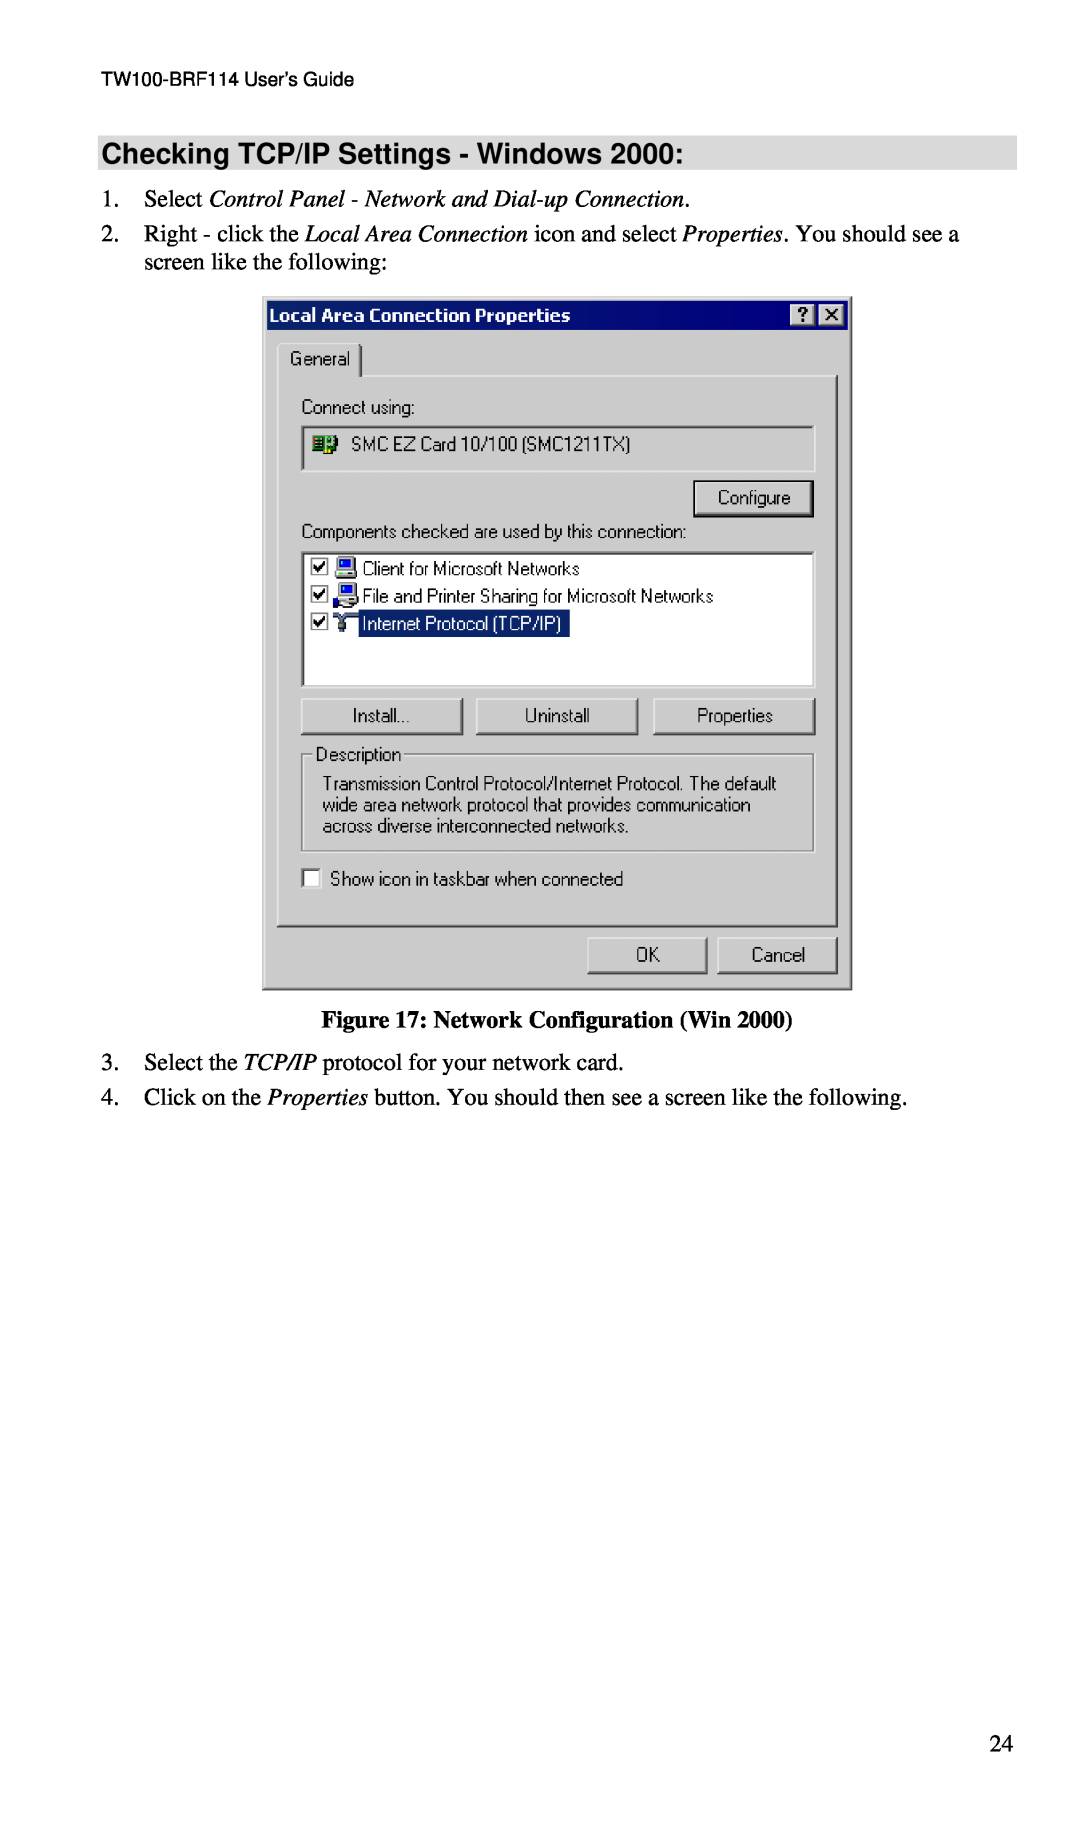 TRENDnet BRF114 manual Checking TCP/IP Settings - Windows, Select Control Panel - Network and Dial-up Connection 